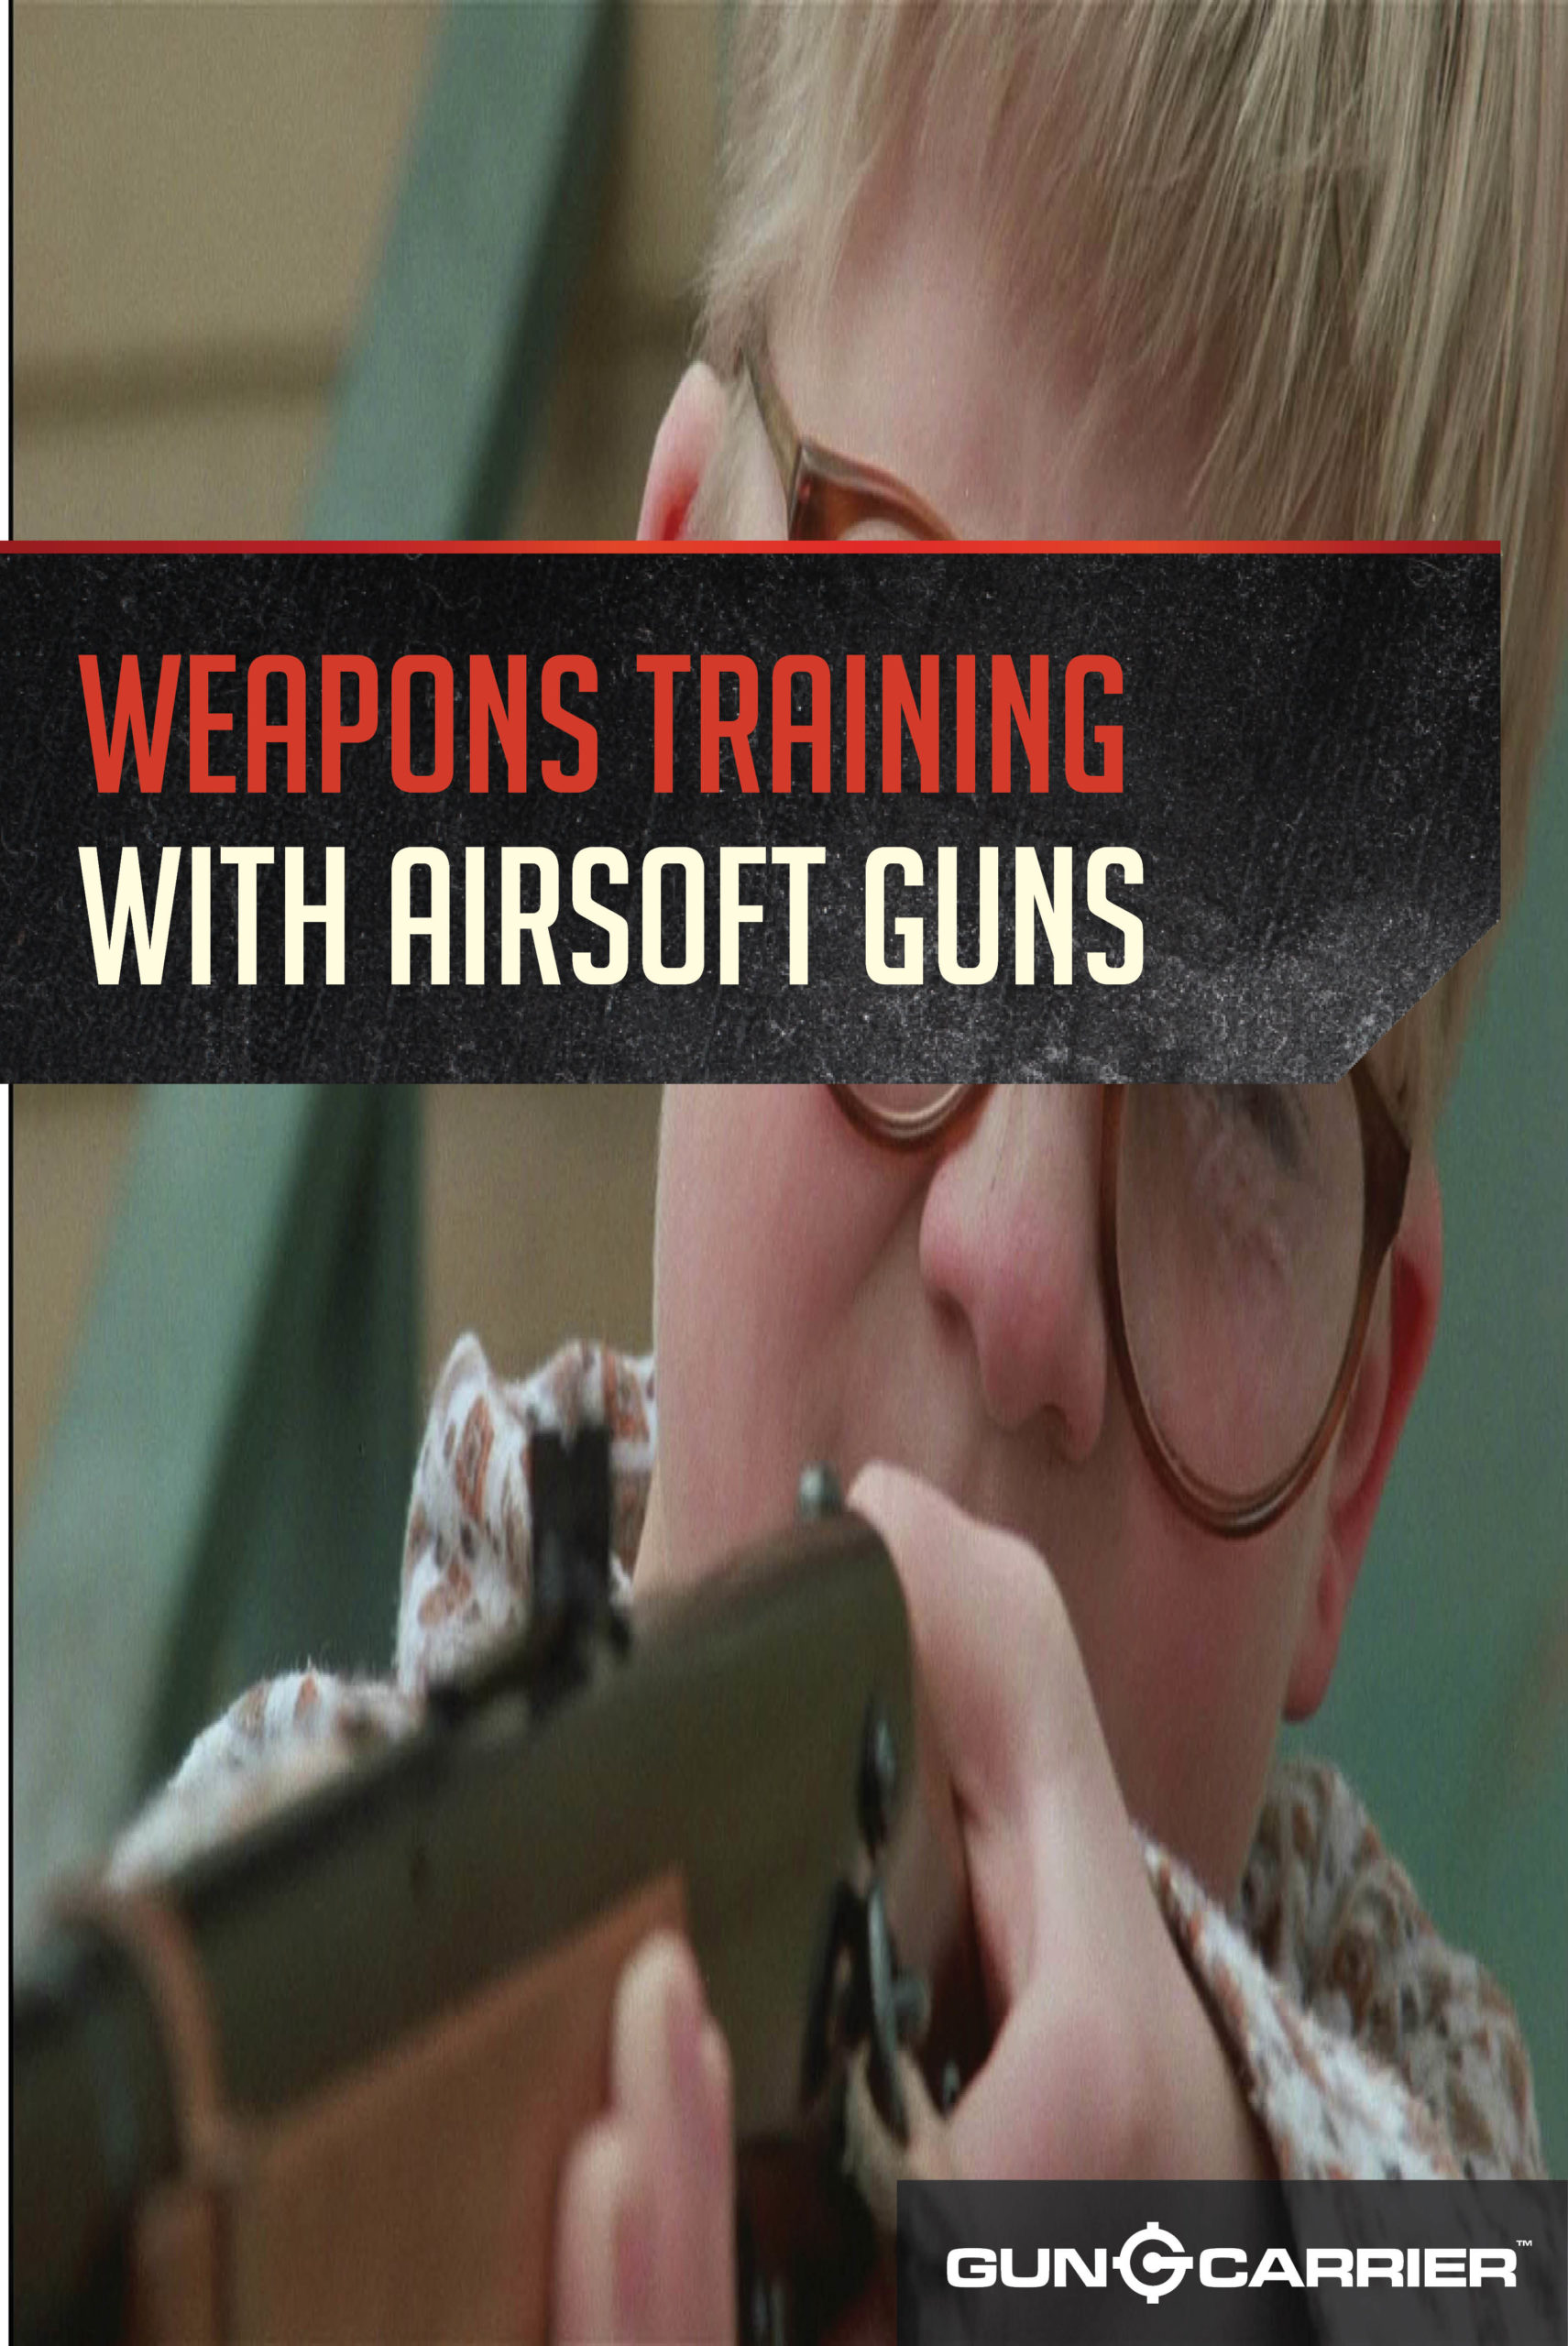 Defensive Weapon Training: The Airsoft Alternative Part I by Gun Carrier at https://guncarrier.com/airsoft-alternative-part-1